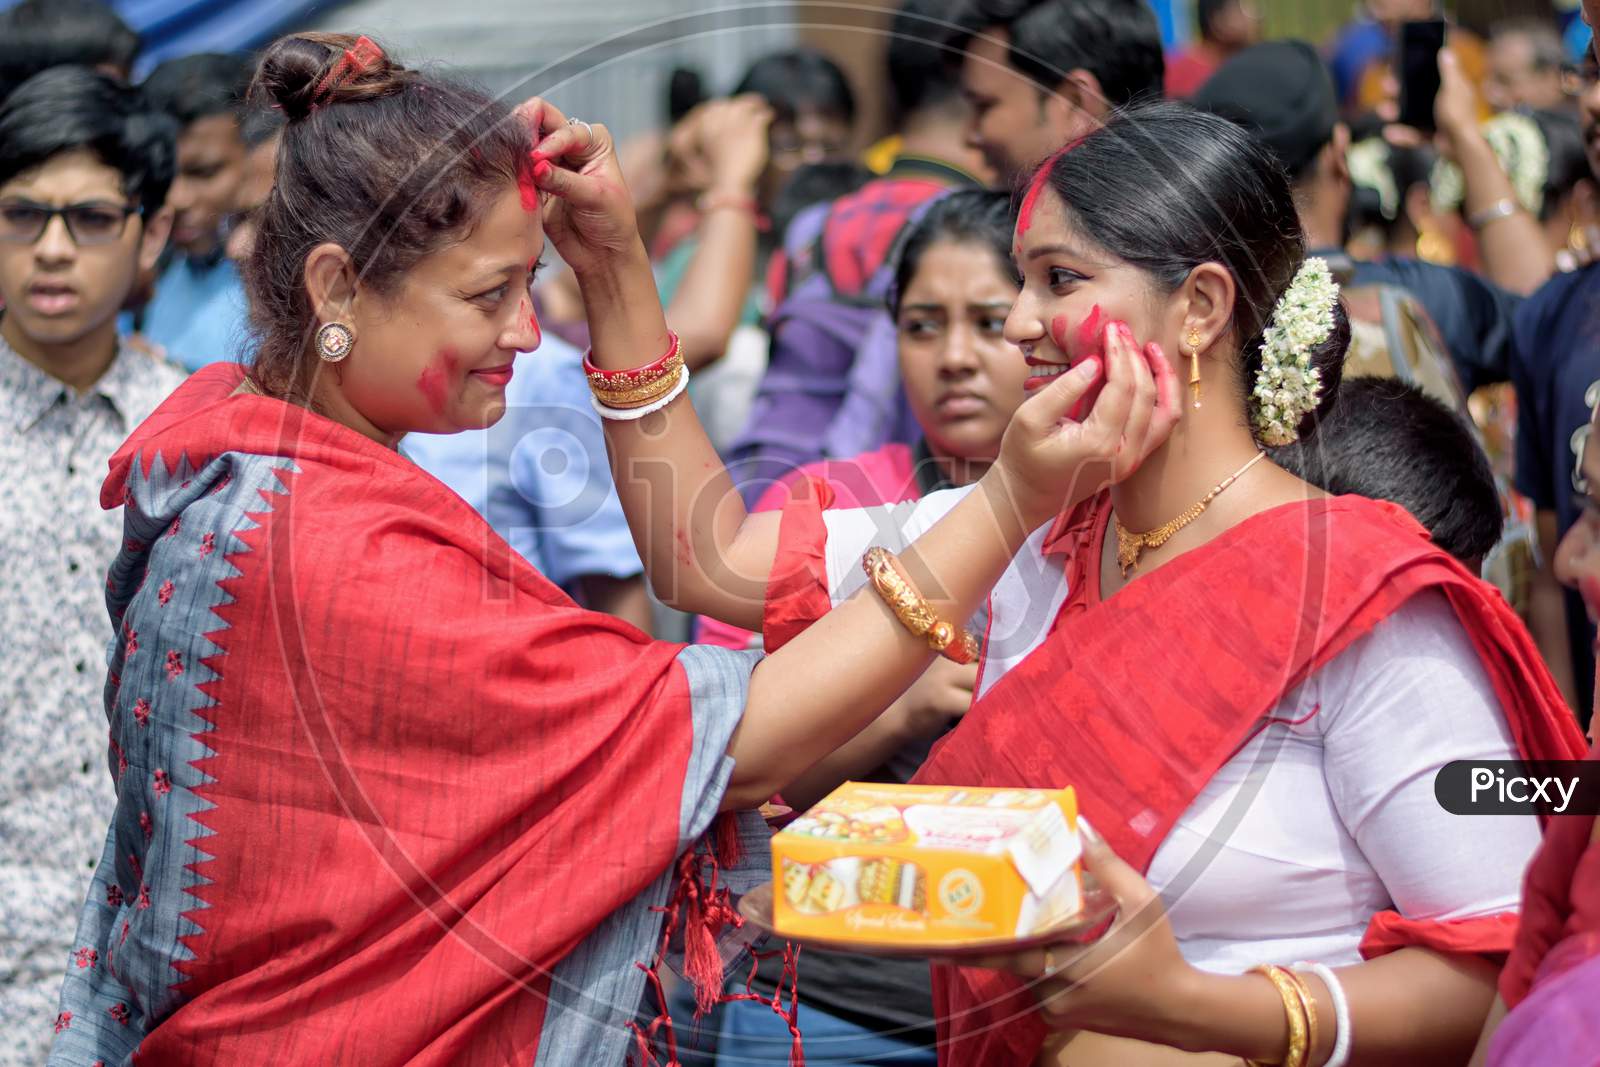 Women Participate In Sindur Khela At A Puja Pandal On The Last Day Of Durga Puja At Baghbazar Sarbojanin In Kolkata On October 2019